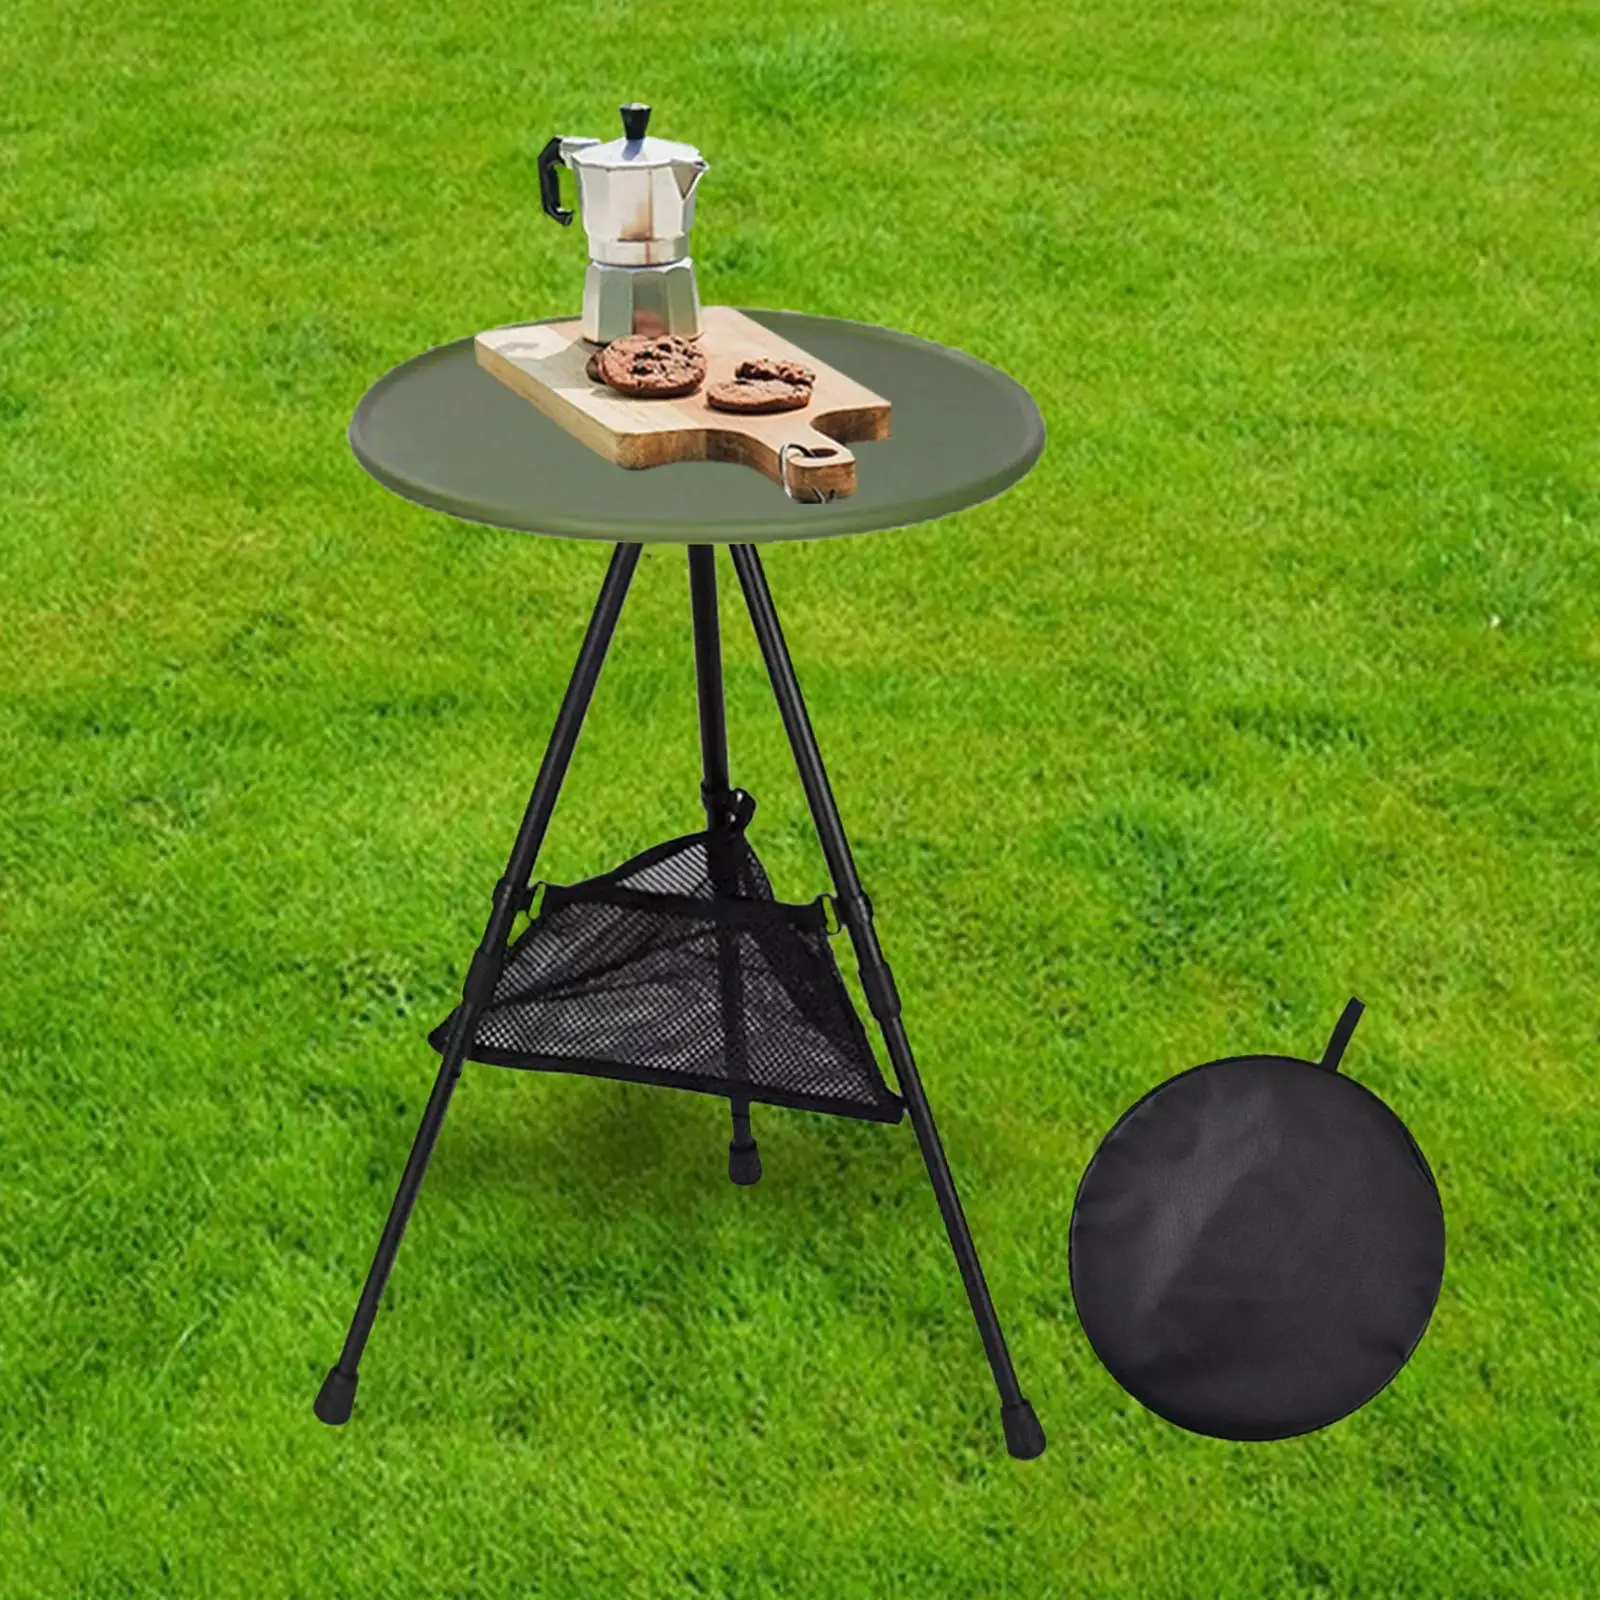 Outdoor Round Table Tea Coffee Table Portable Folding Camping Table Foldable Picnic Table Furniture for BBQ Backyard Backpacking